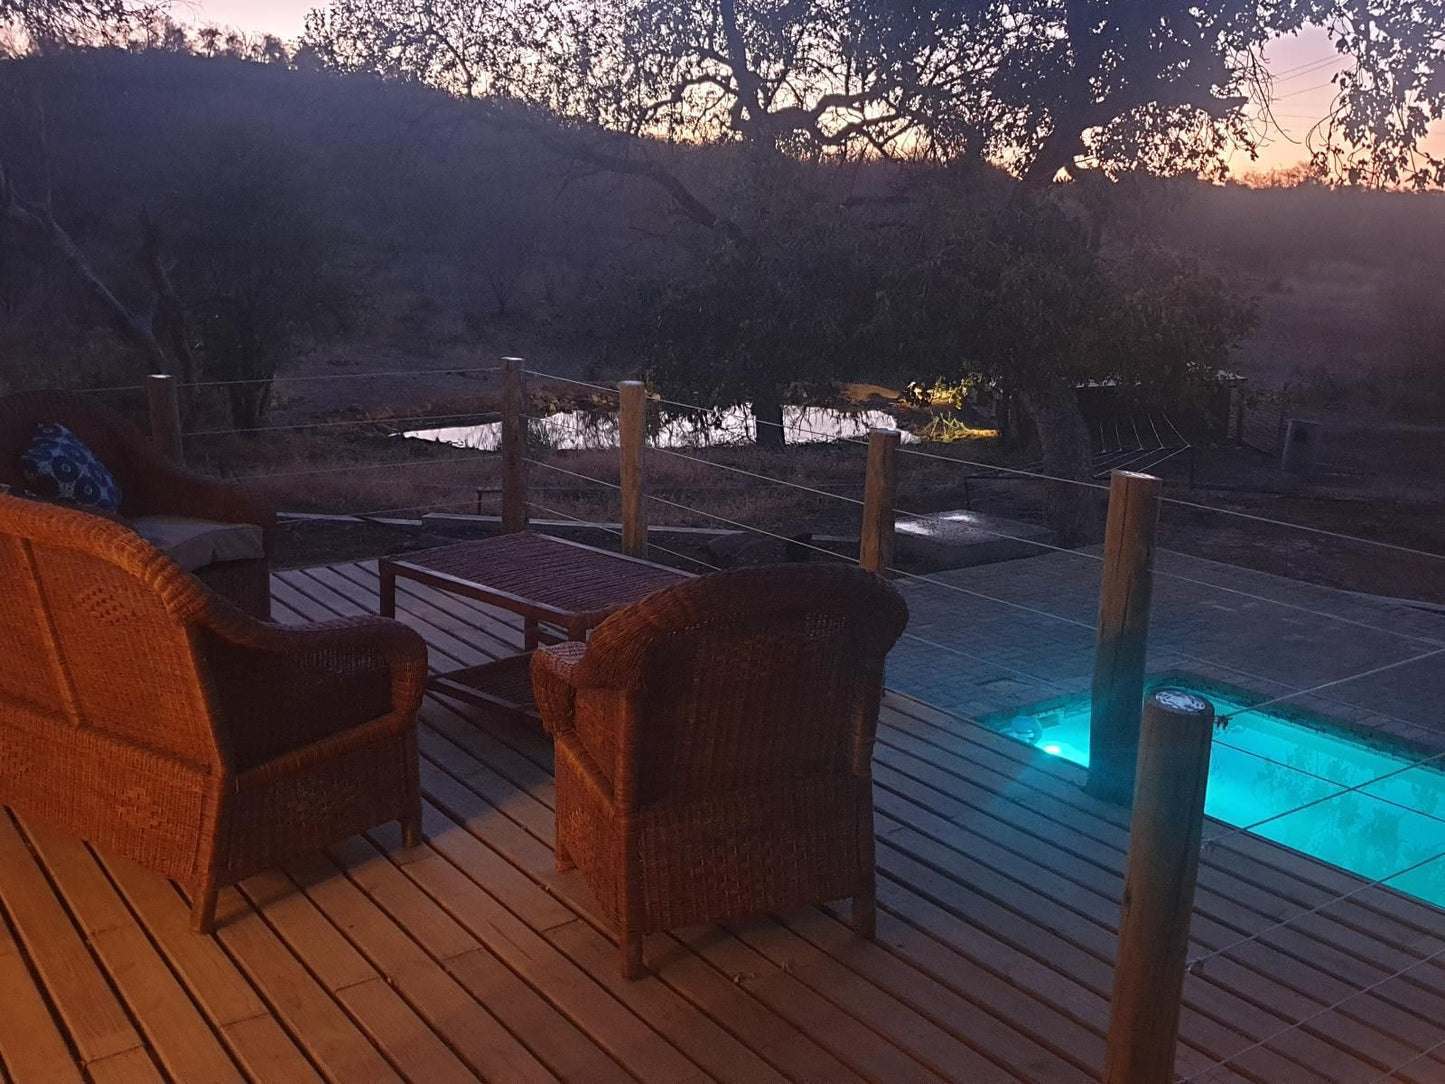 Antares Bush Camp And Safaris Grietjie Nature Reserve Limpopo Province South Africa Swimming Pool